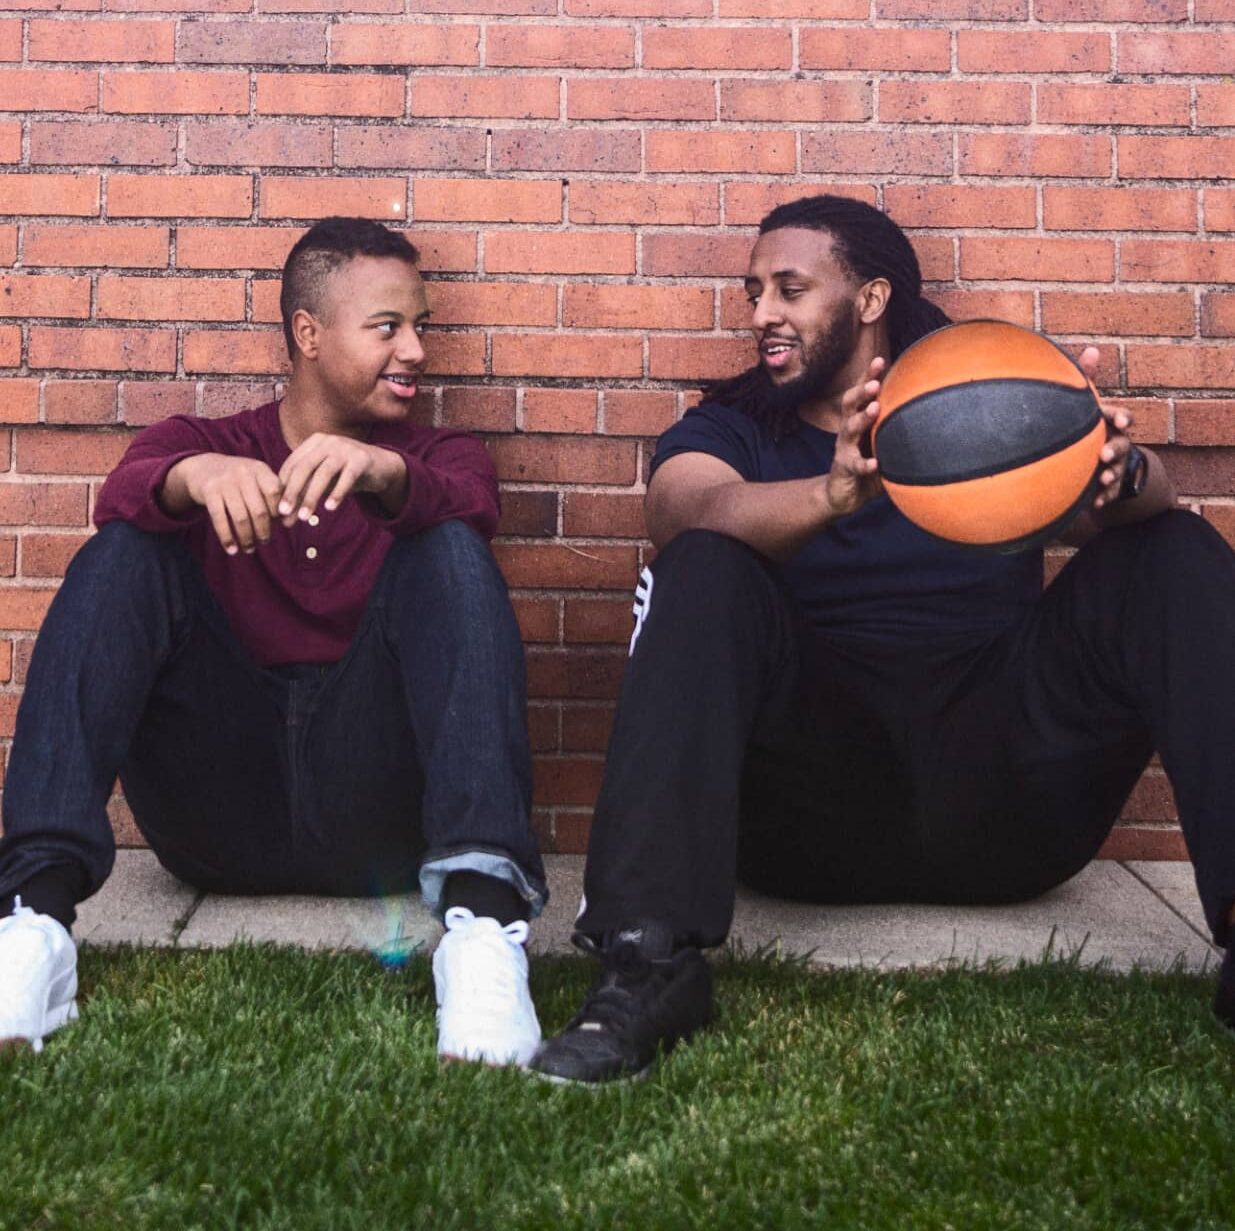 A big and little brother sit outside smiling at each other holding a basketball